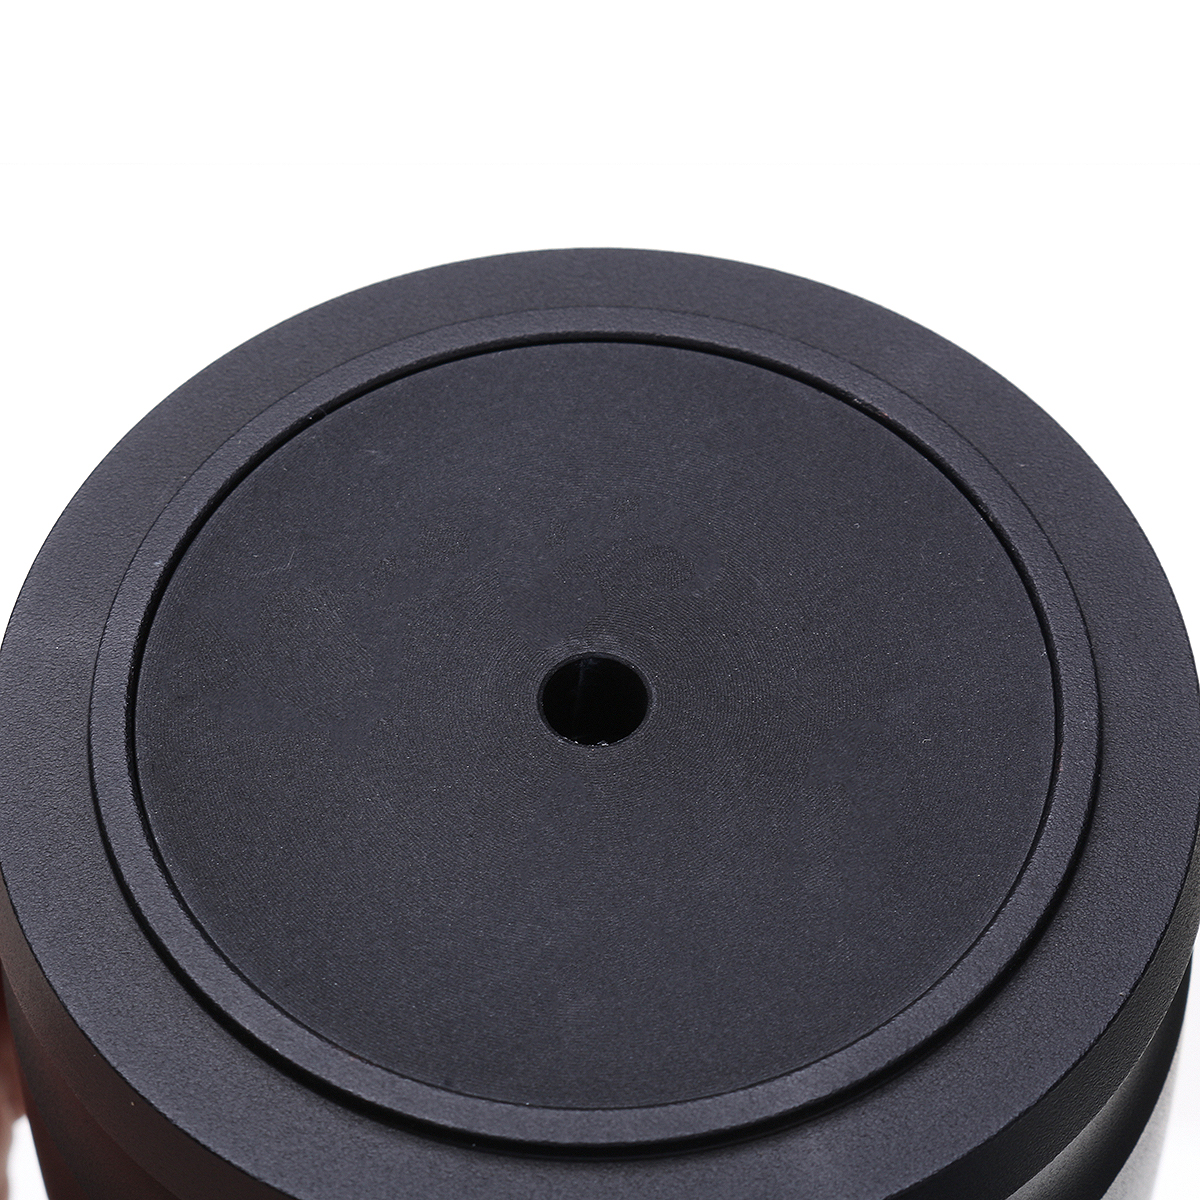 Aluminum-Dosing-Ring-for-Brewing-Bowl-Coffee-Powder-Accessories-for-58MM-Coffee-Tamper-Cup-1468128-10